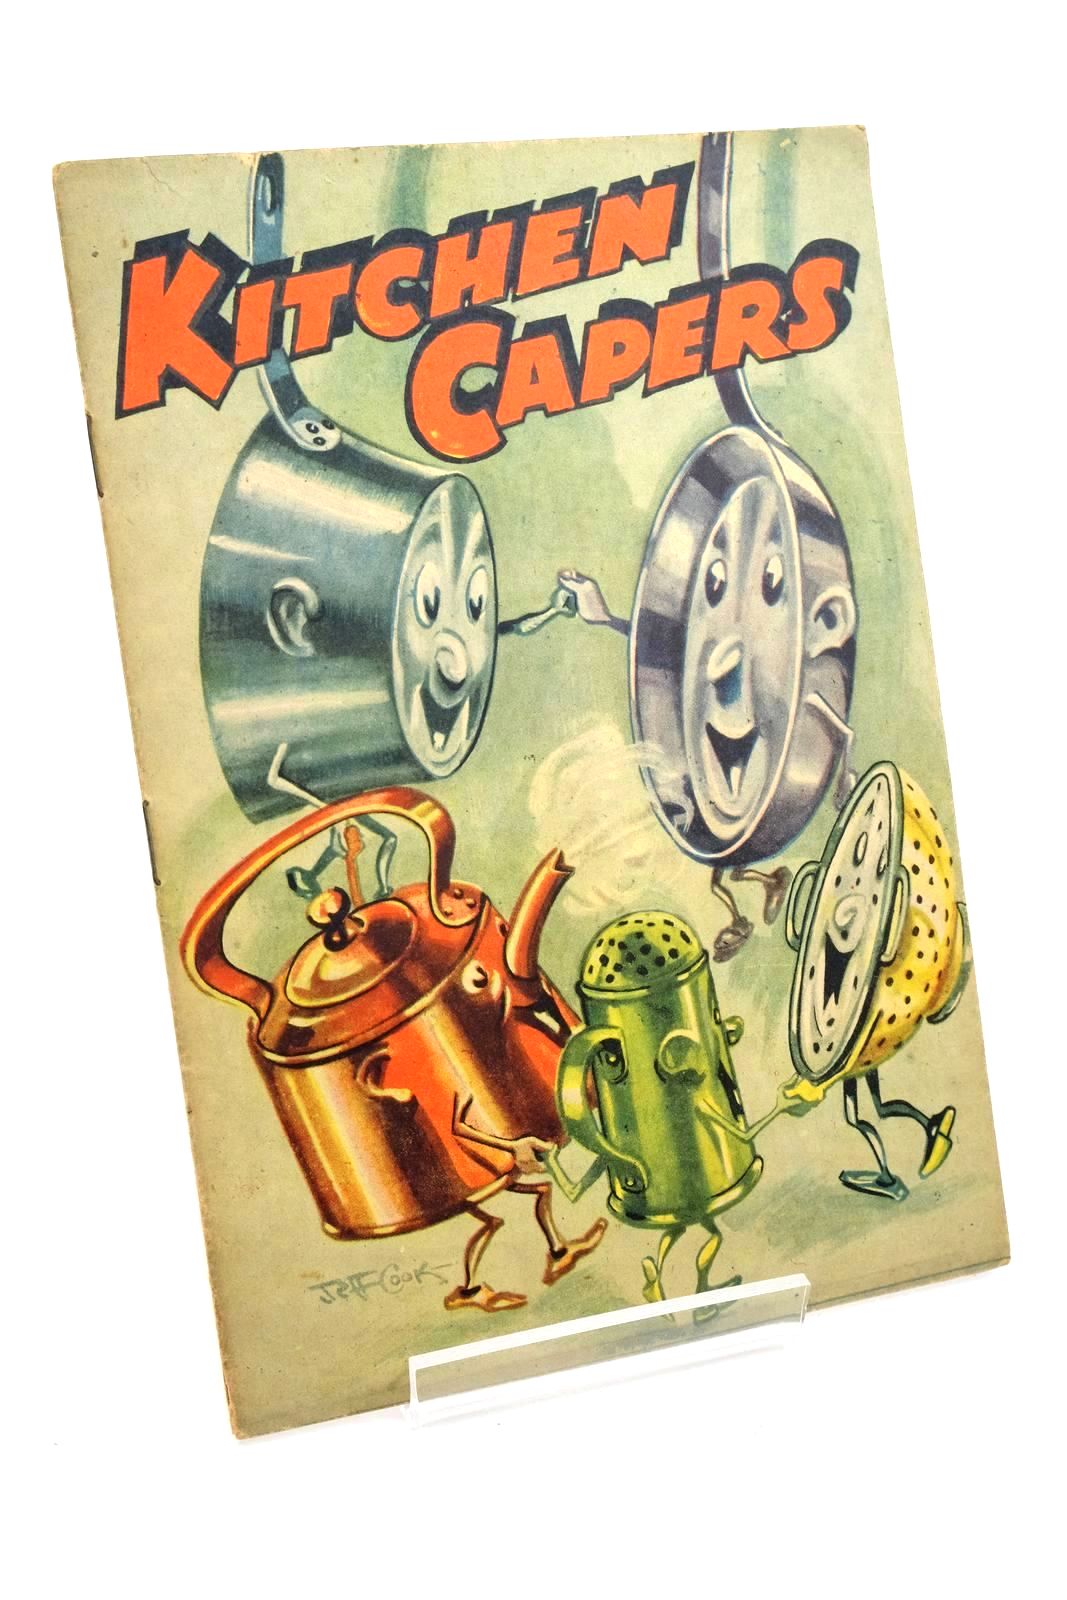 Photo of KITCHEN CAPERS illustrated by Cook, Jeff published by Renwick of Otley (STOCK CODE: 1322216)  for sale by Stella & Rose's Books